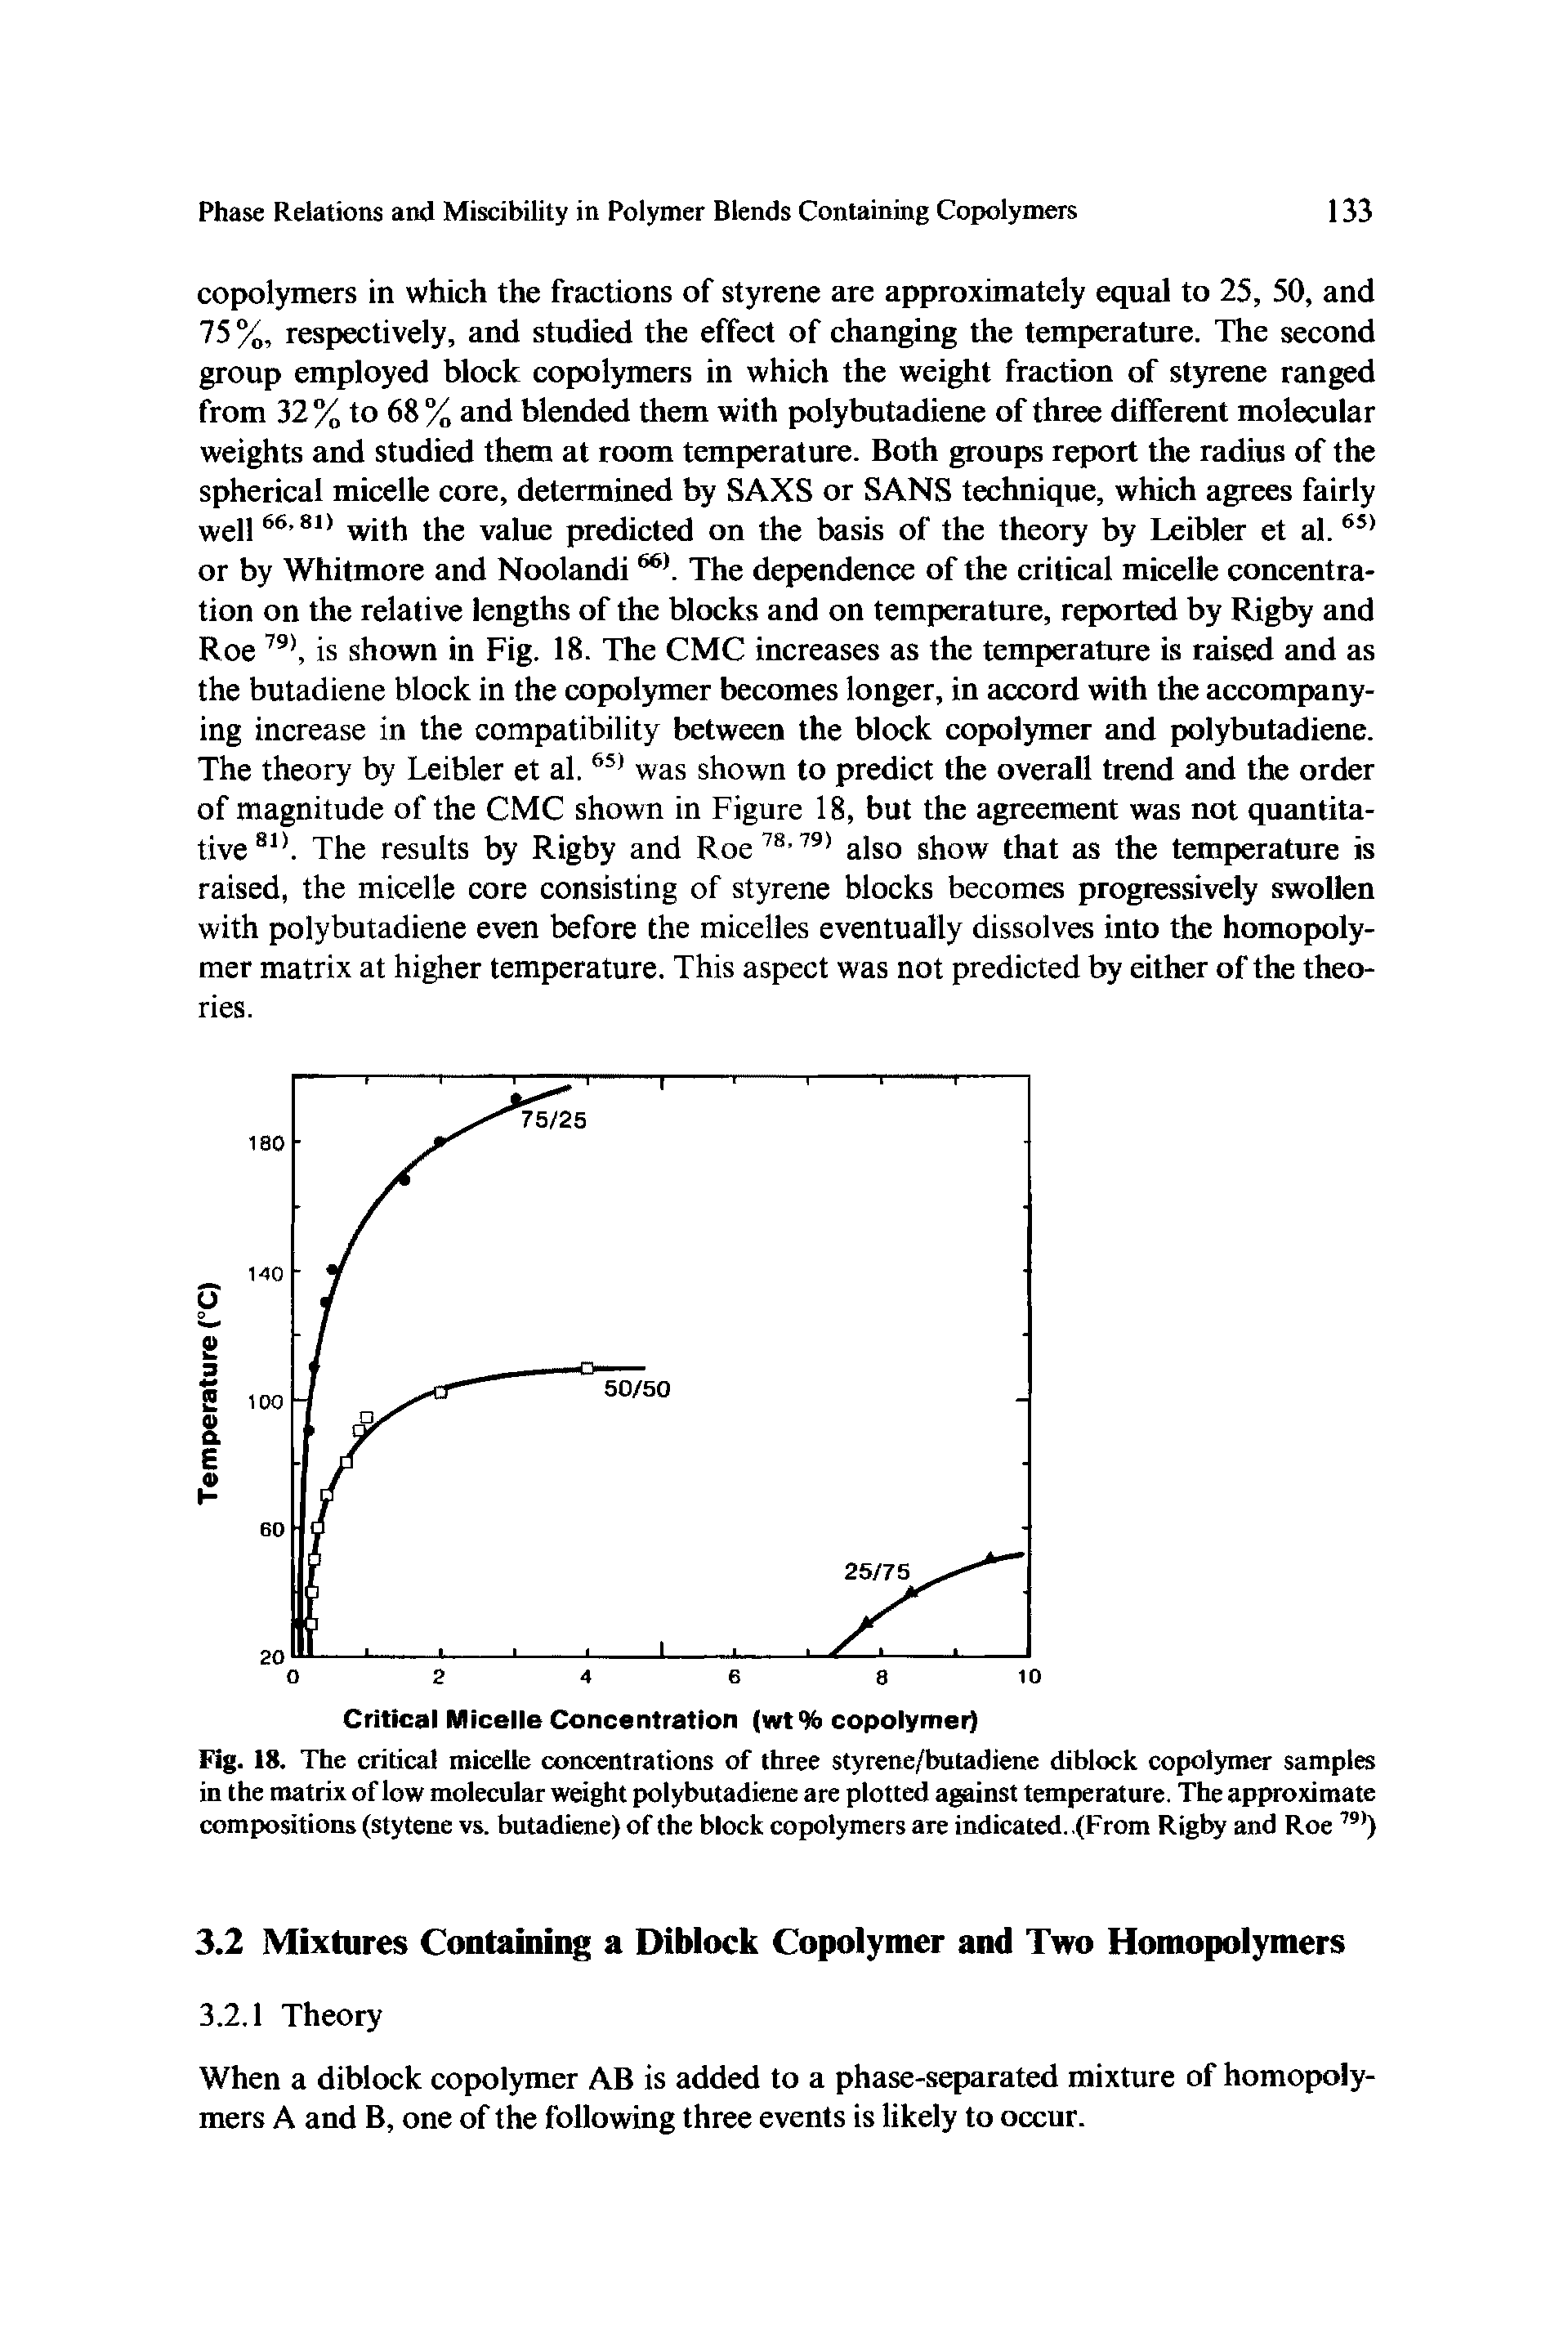 Fig. 18. The critical micelle concentrations of three styrene/butadiene diblock copolymer samples in the matrix of low molecular weight polybutadiene are plotted against temperature. The approximate compositions (stytene vs. butadiene) of the block copolymers are indicated.. (From Rigby and Roe )...